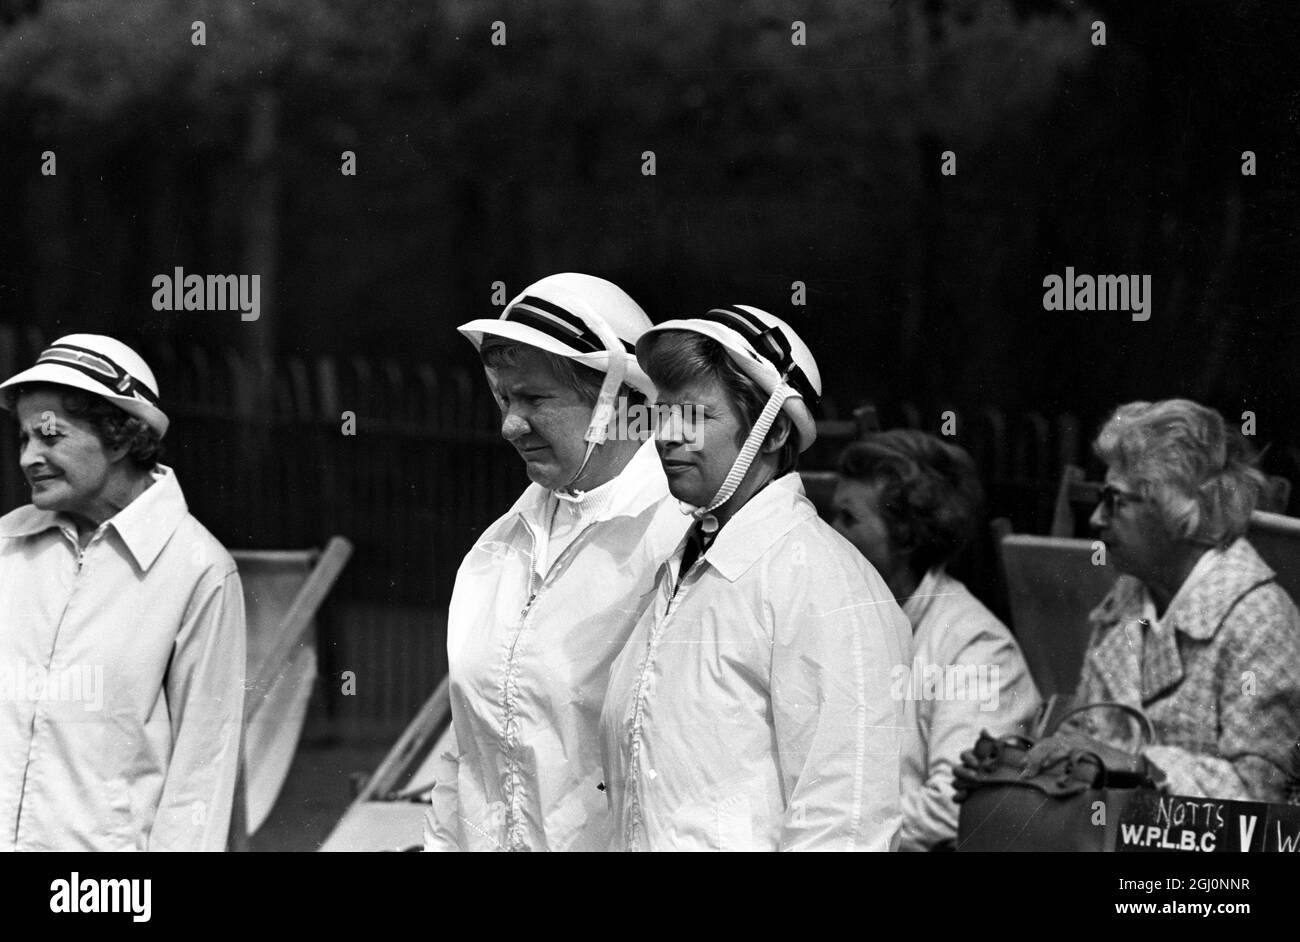 Two white clad women wear hat straps under their chins to prevent them falling , at the Amateur National Championships of the English Women's Bowling Association at Wimbledon Park , London , England . 25 August 1969 Stock Photo